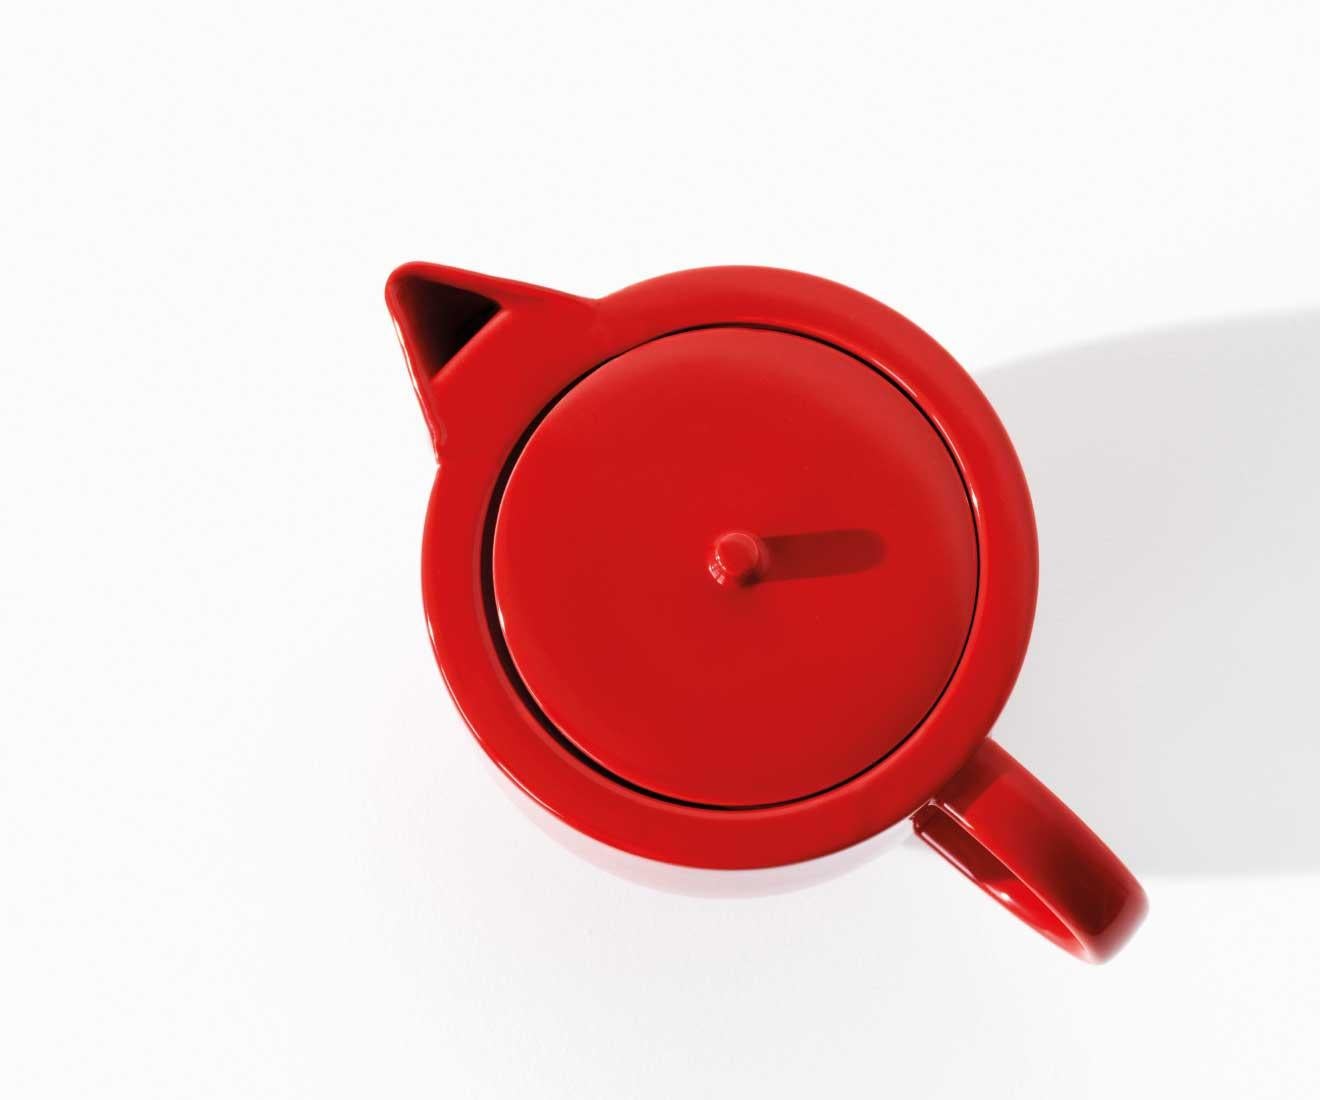 The YOKO teapot is a significant and distinctive piece of tableware. Its simple, sculptural shape with the firm, sharp edges challenges the soft material of porcelain.

The teapot is available in red and dark navy blue. It contains 1,38L

YOKO is a